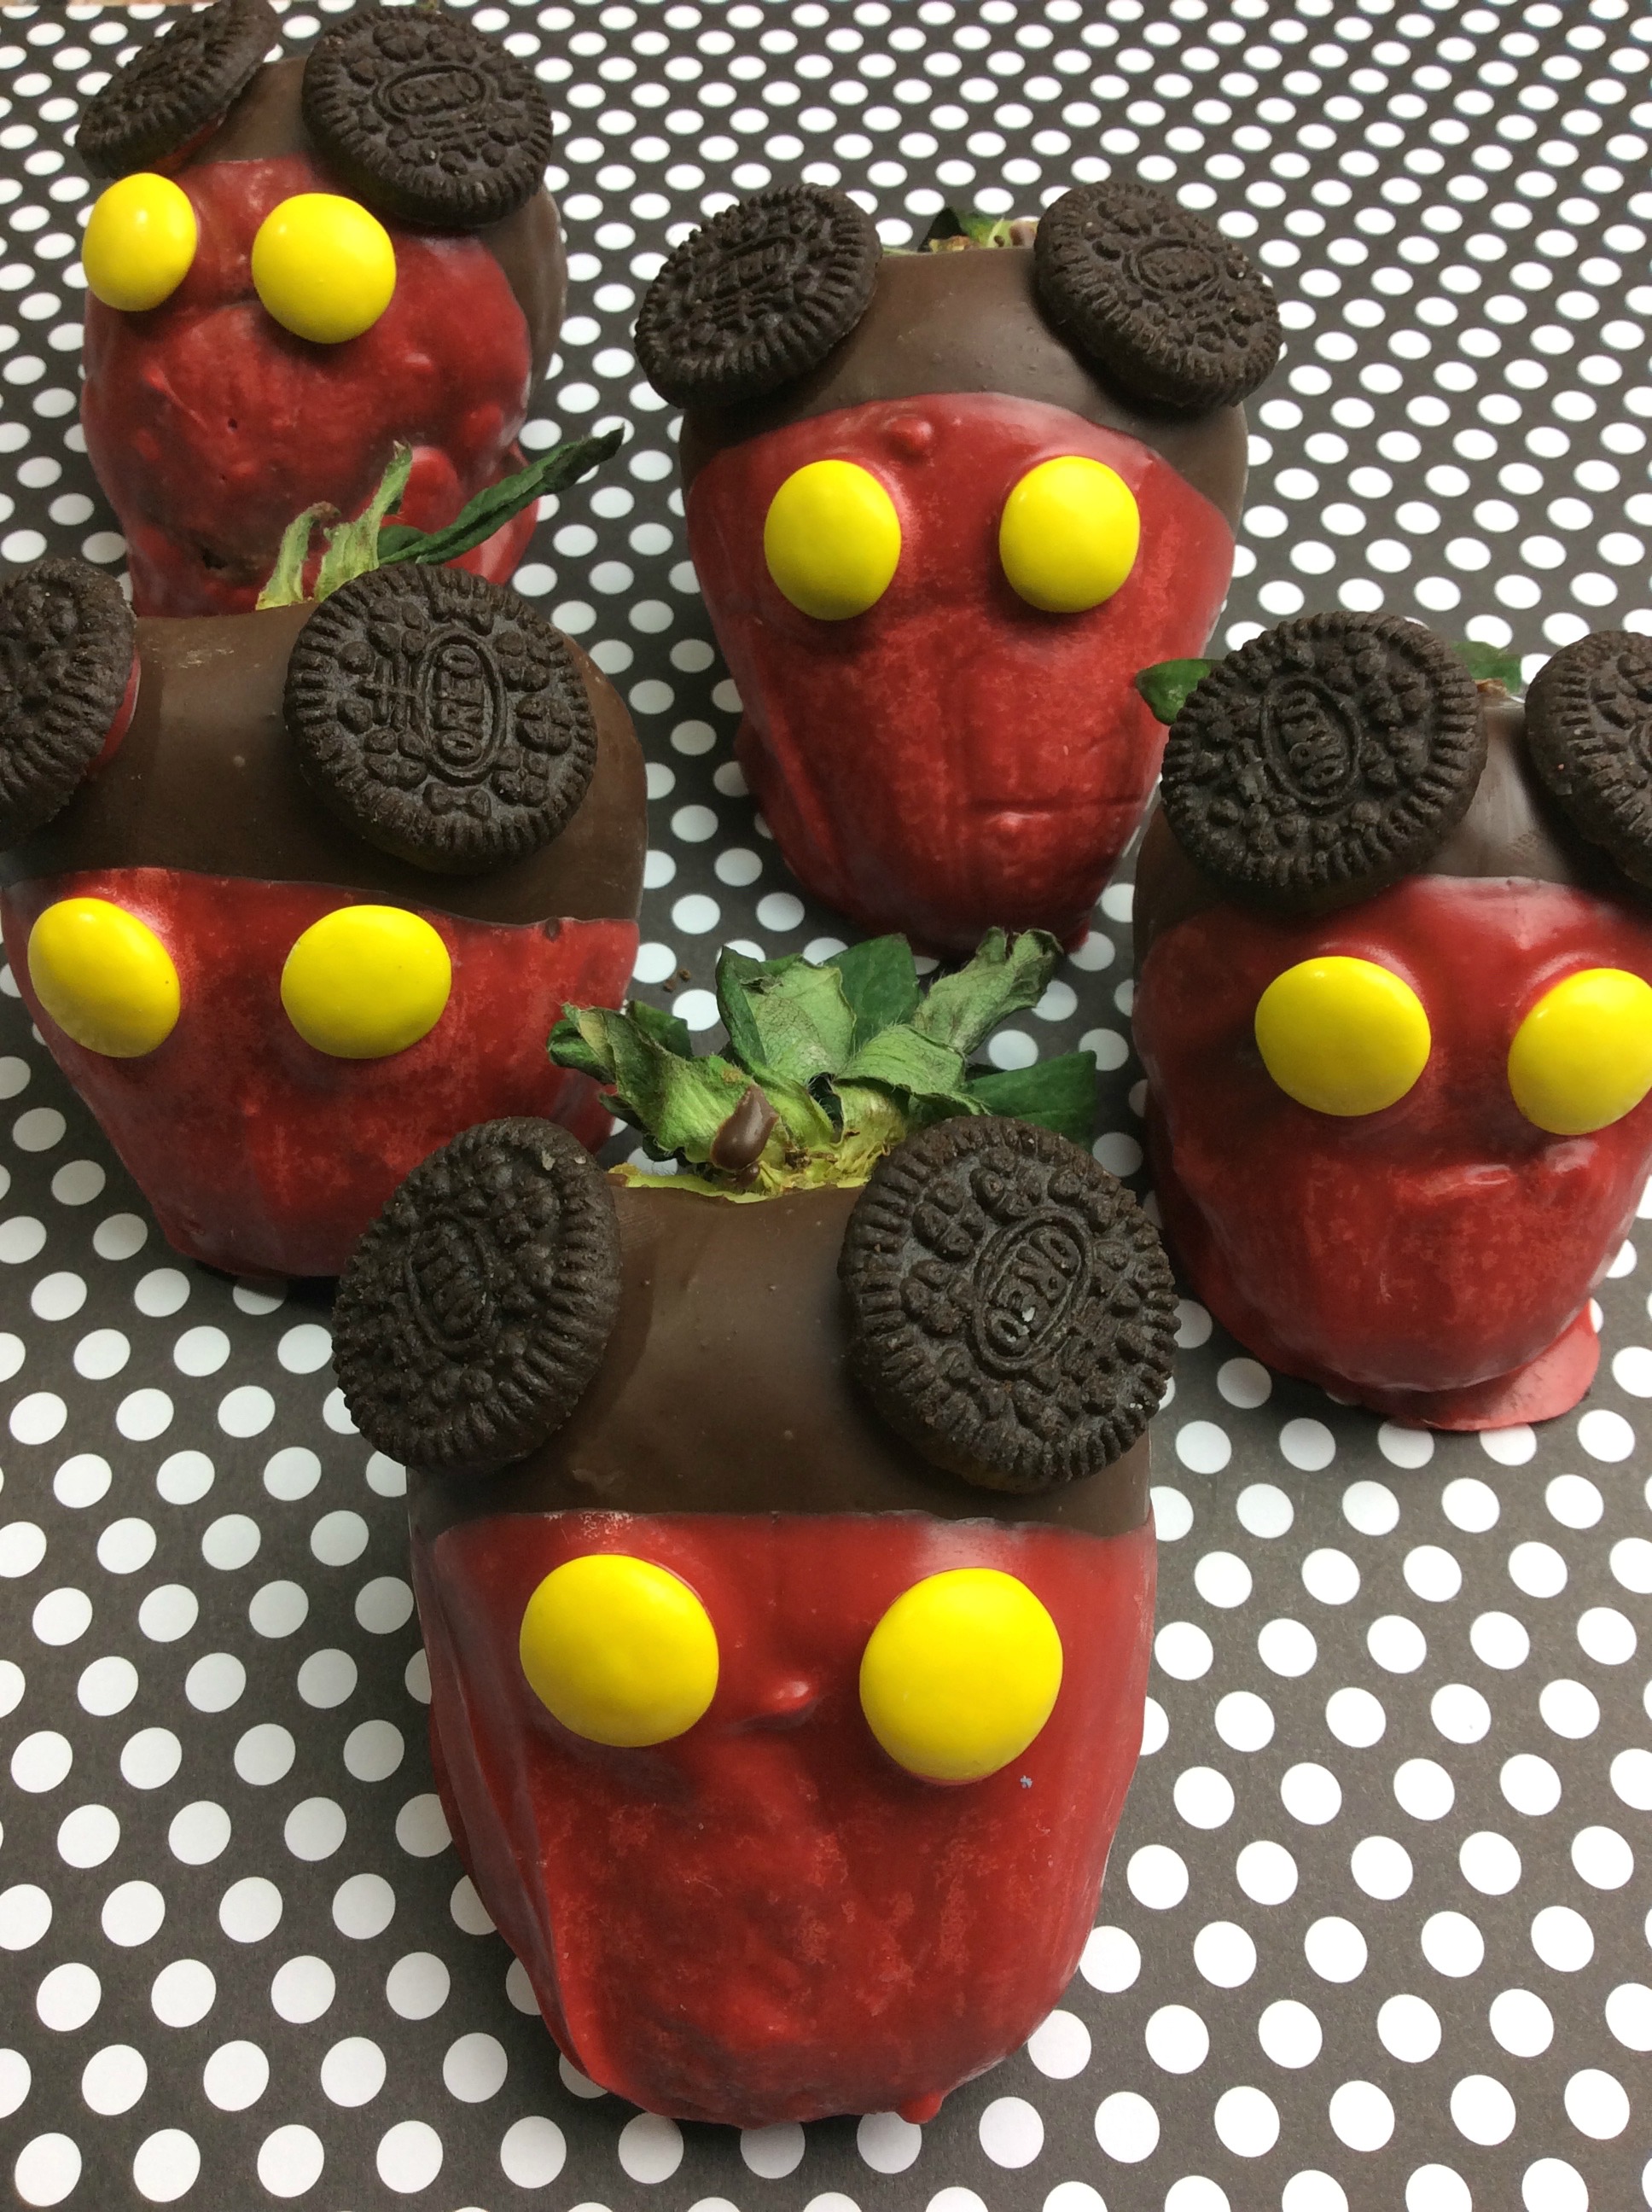 I think the only thing better than chocolate covered strawberries are Mickey Mouse chocolate covered strawberries. Easy to make and will leave your Disney fan smiling